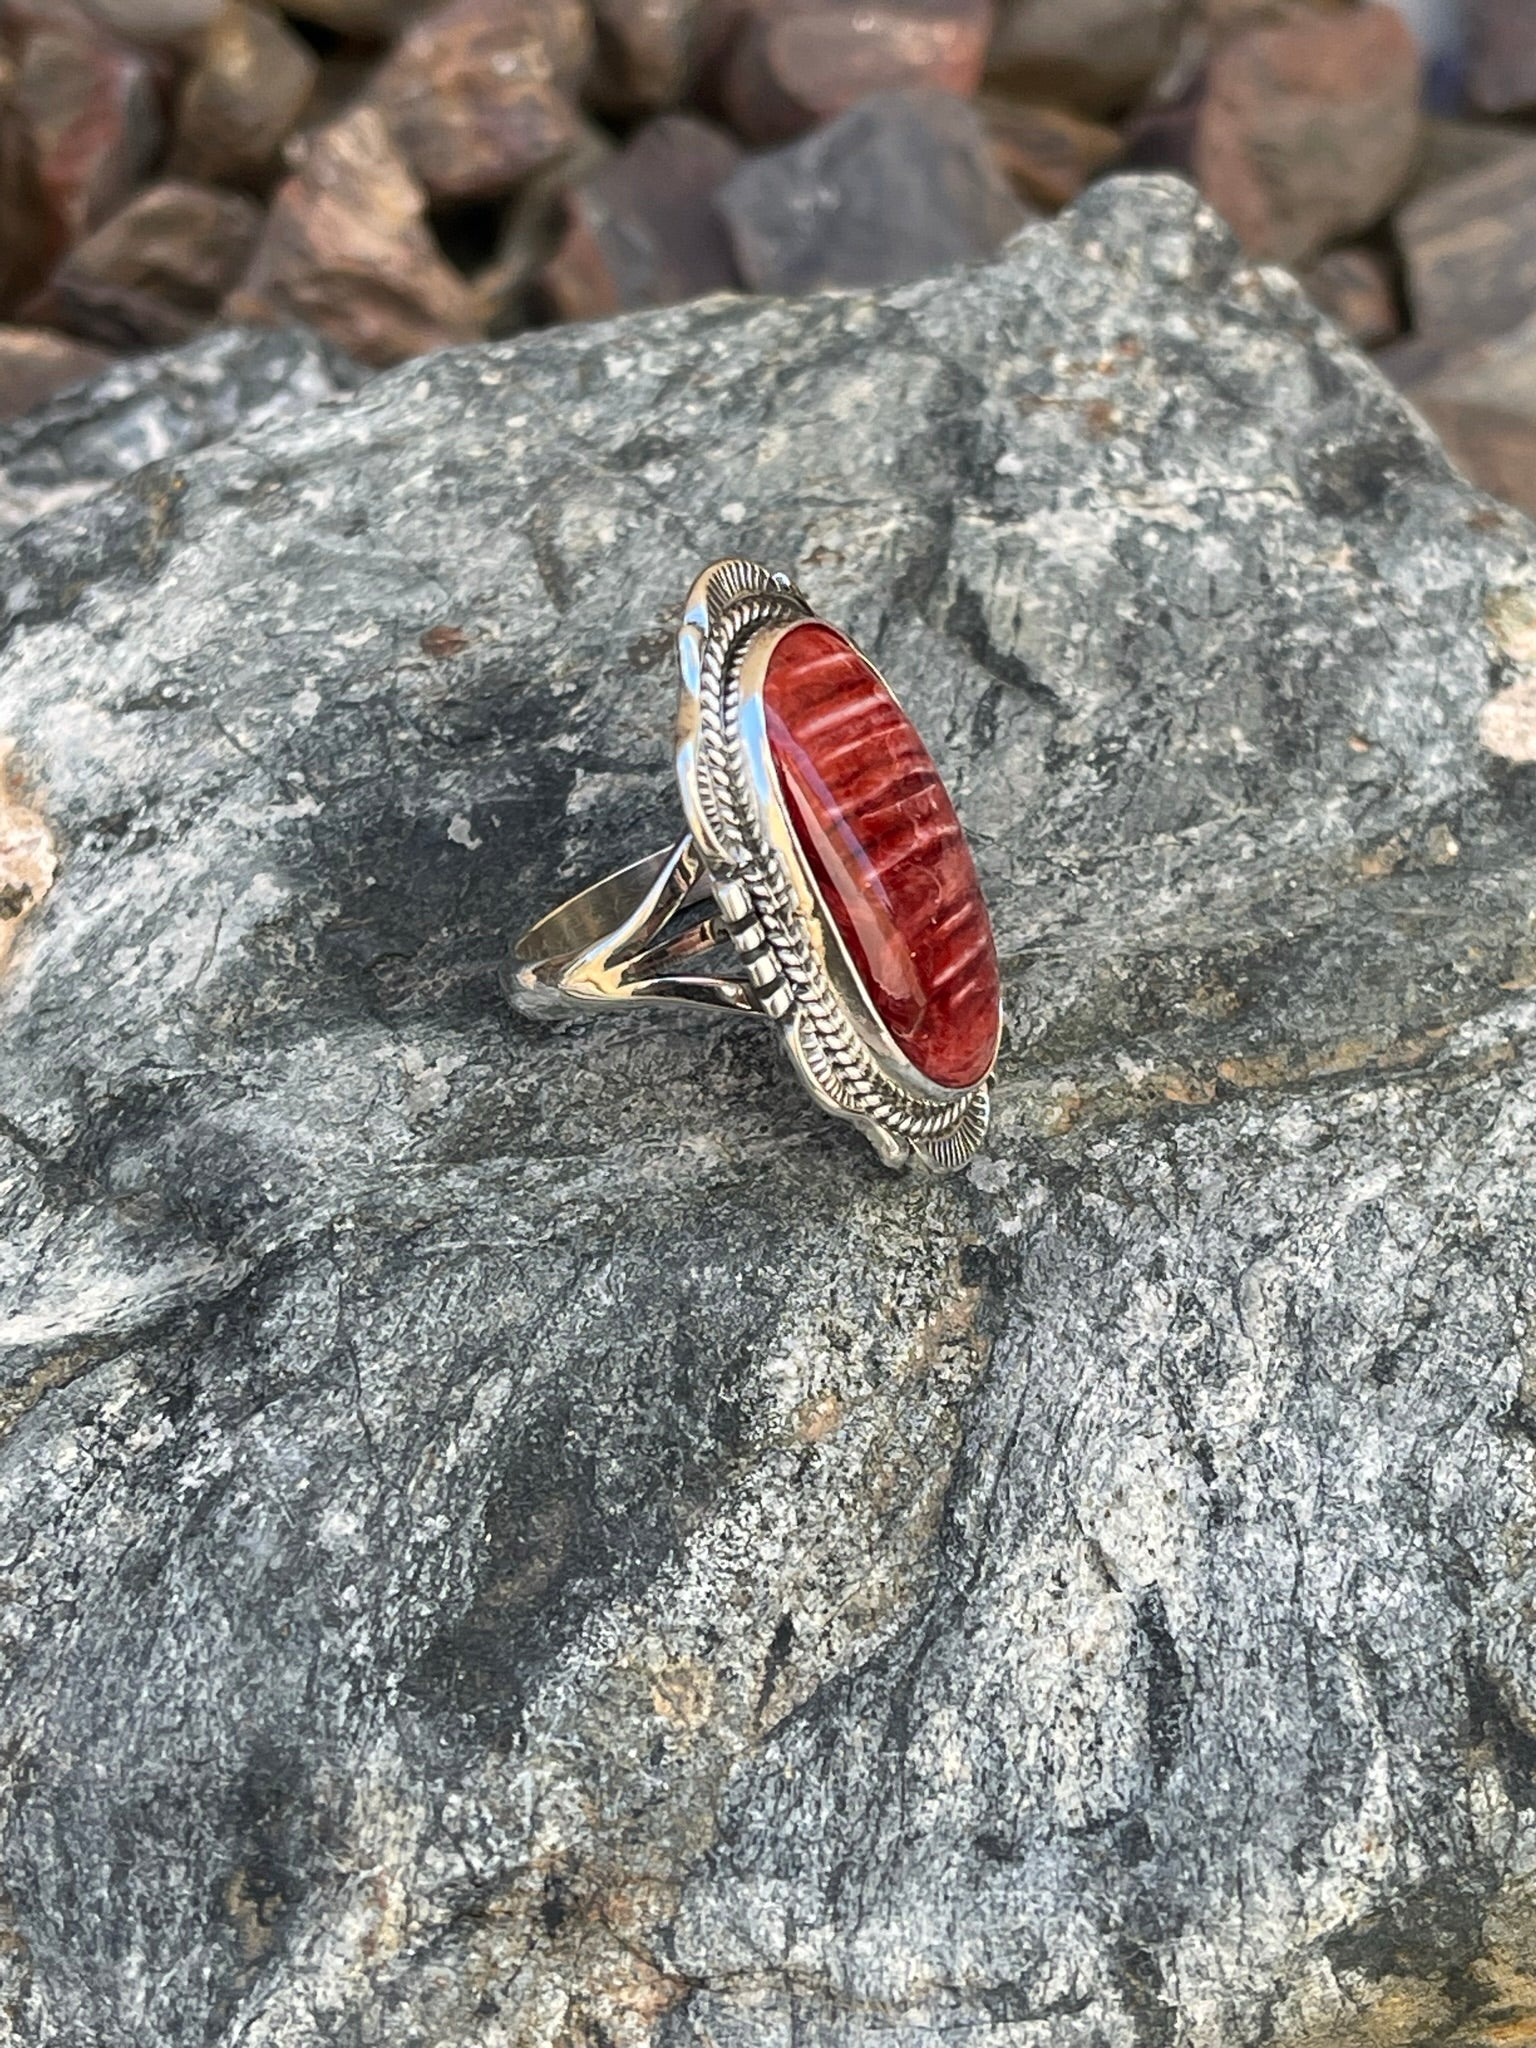 Handmade Solid Sterling Red Spiny Oyster Ring with Hand Stamped Detail - Size 6 1/2